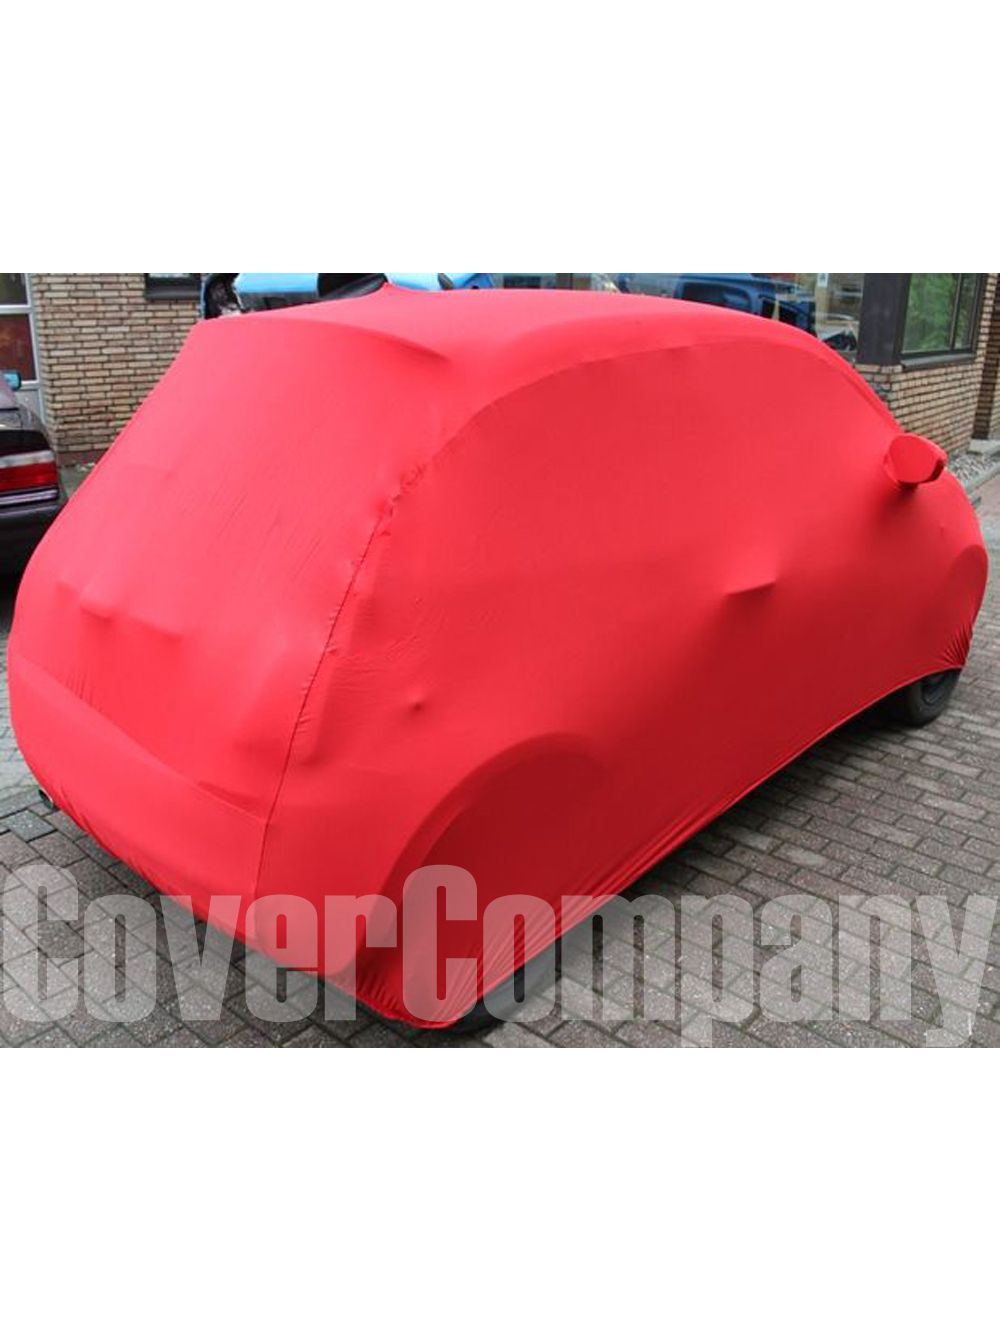 Perfect Fit Car Cover for Abarth - Indoor Silver Range